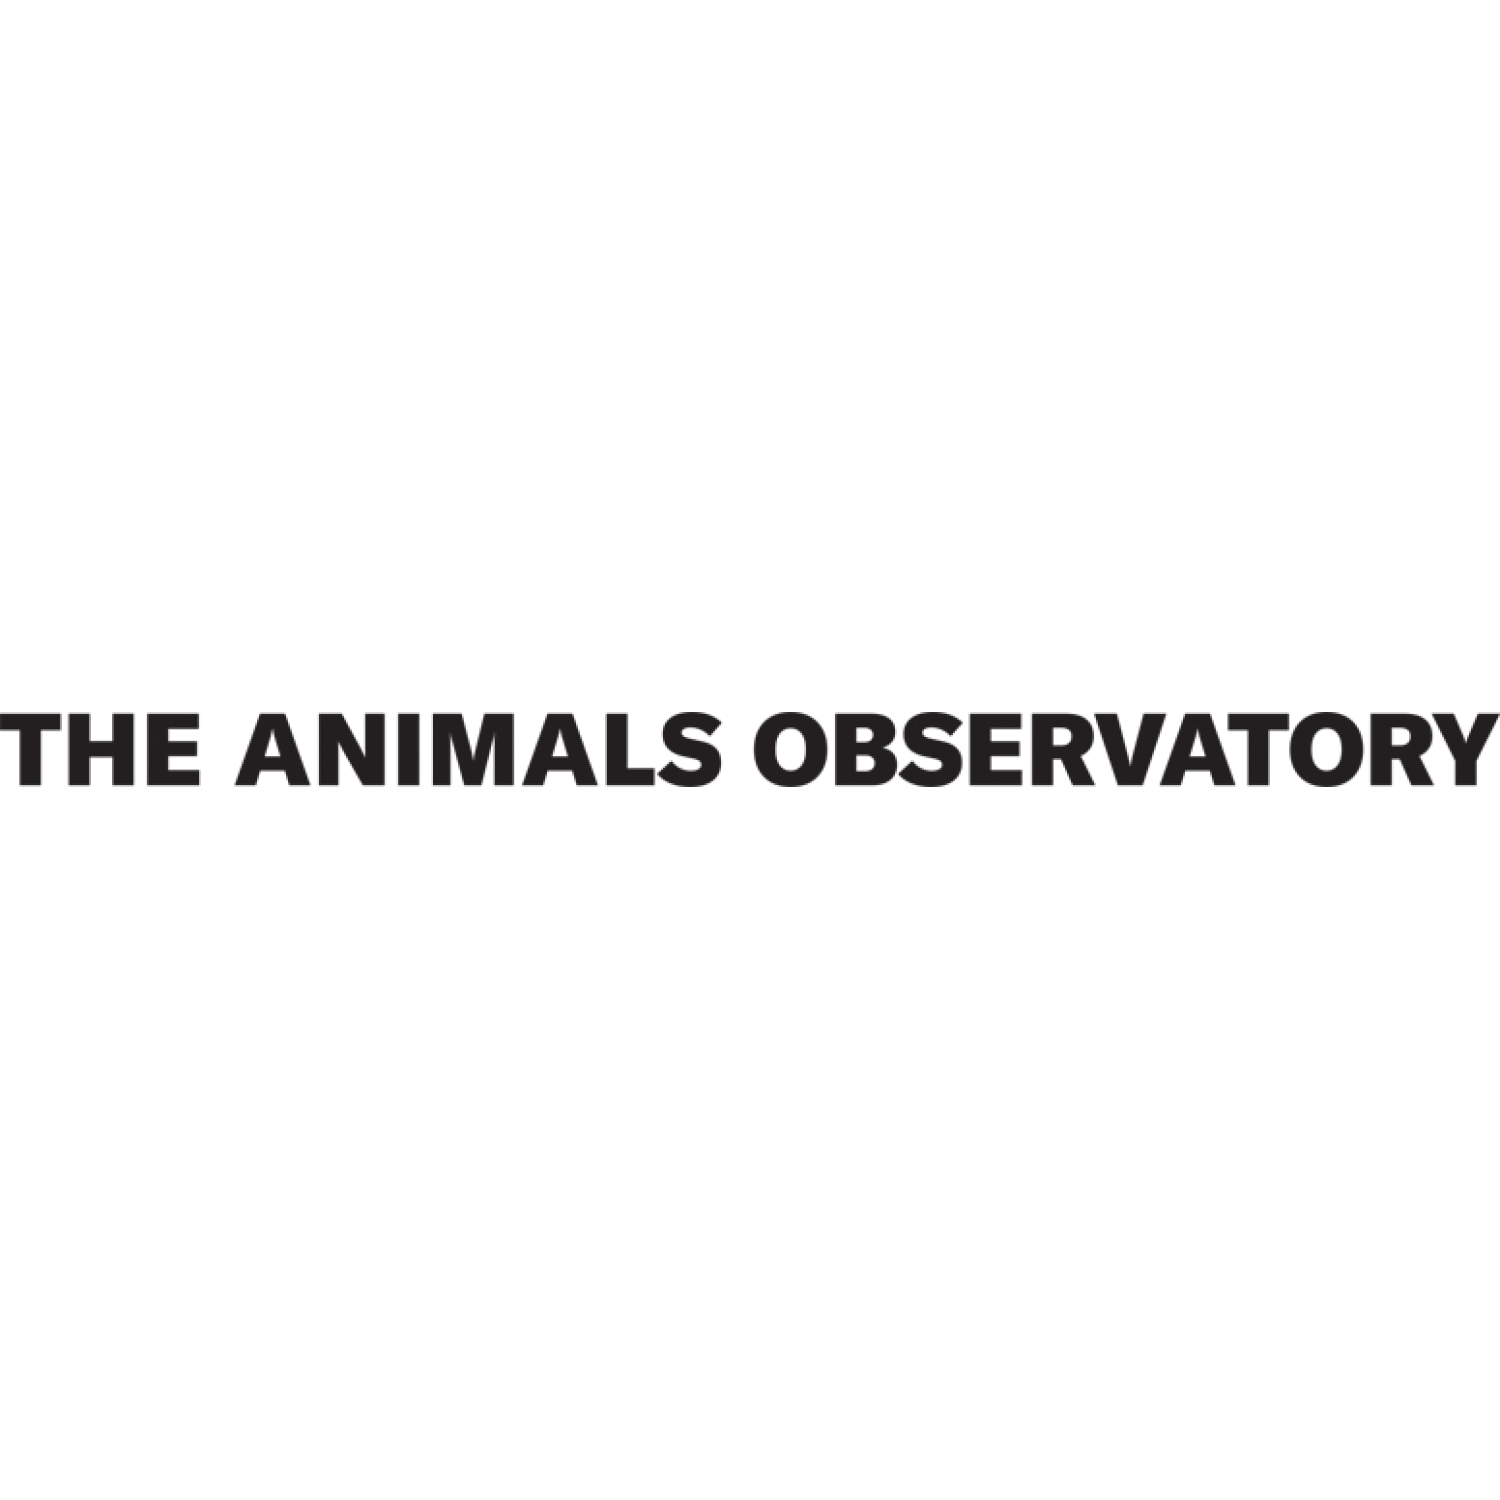 The Animals Observatory